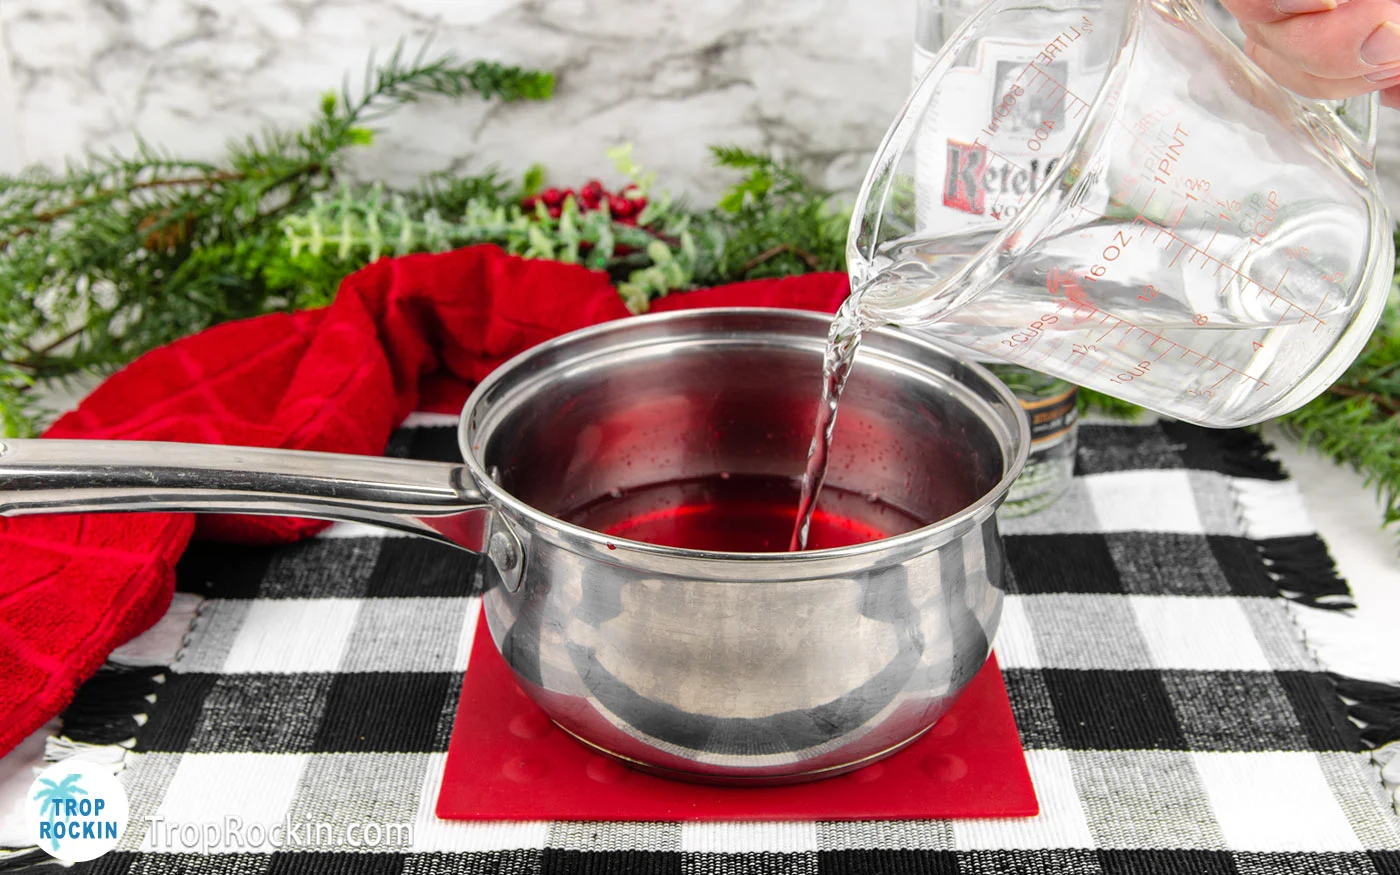 Pouring 1 cup vodka from a measuring cup into the saucepan filled with water and jello packet.